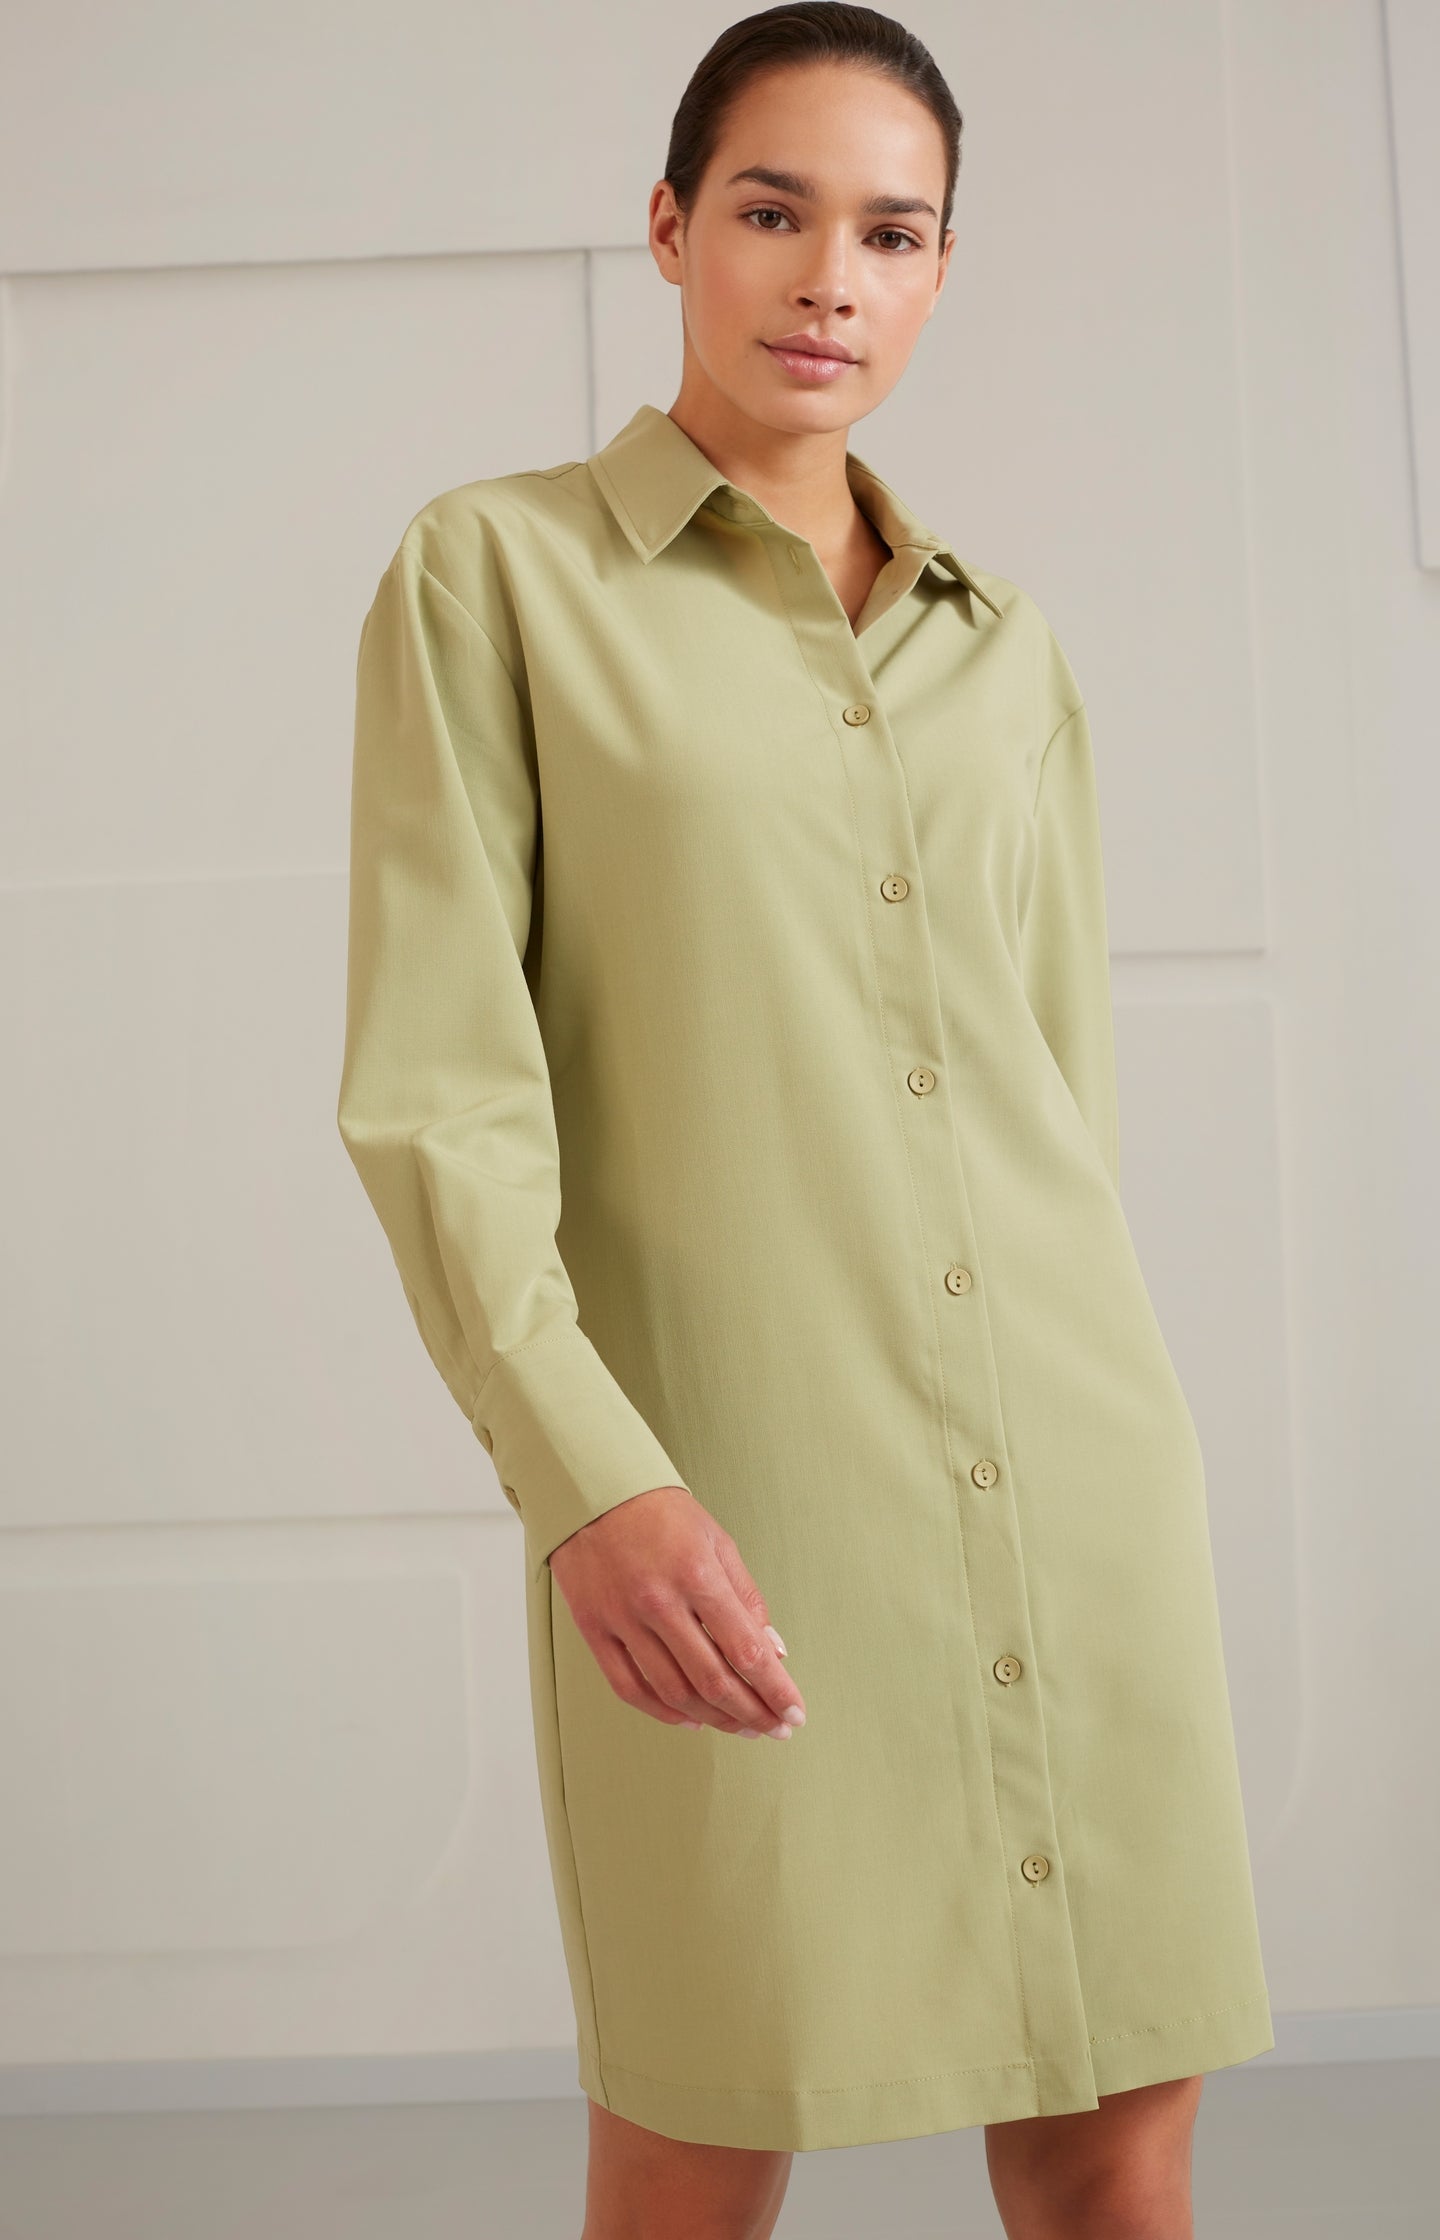 Fitted blouse dress with collar, long sleeves and buttons - Type: lookbook